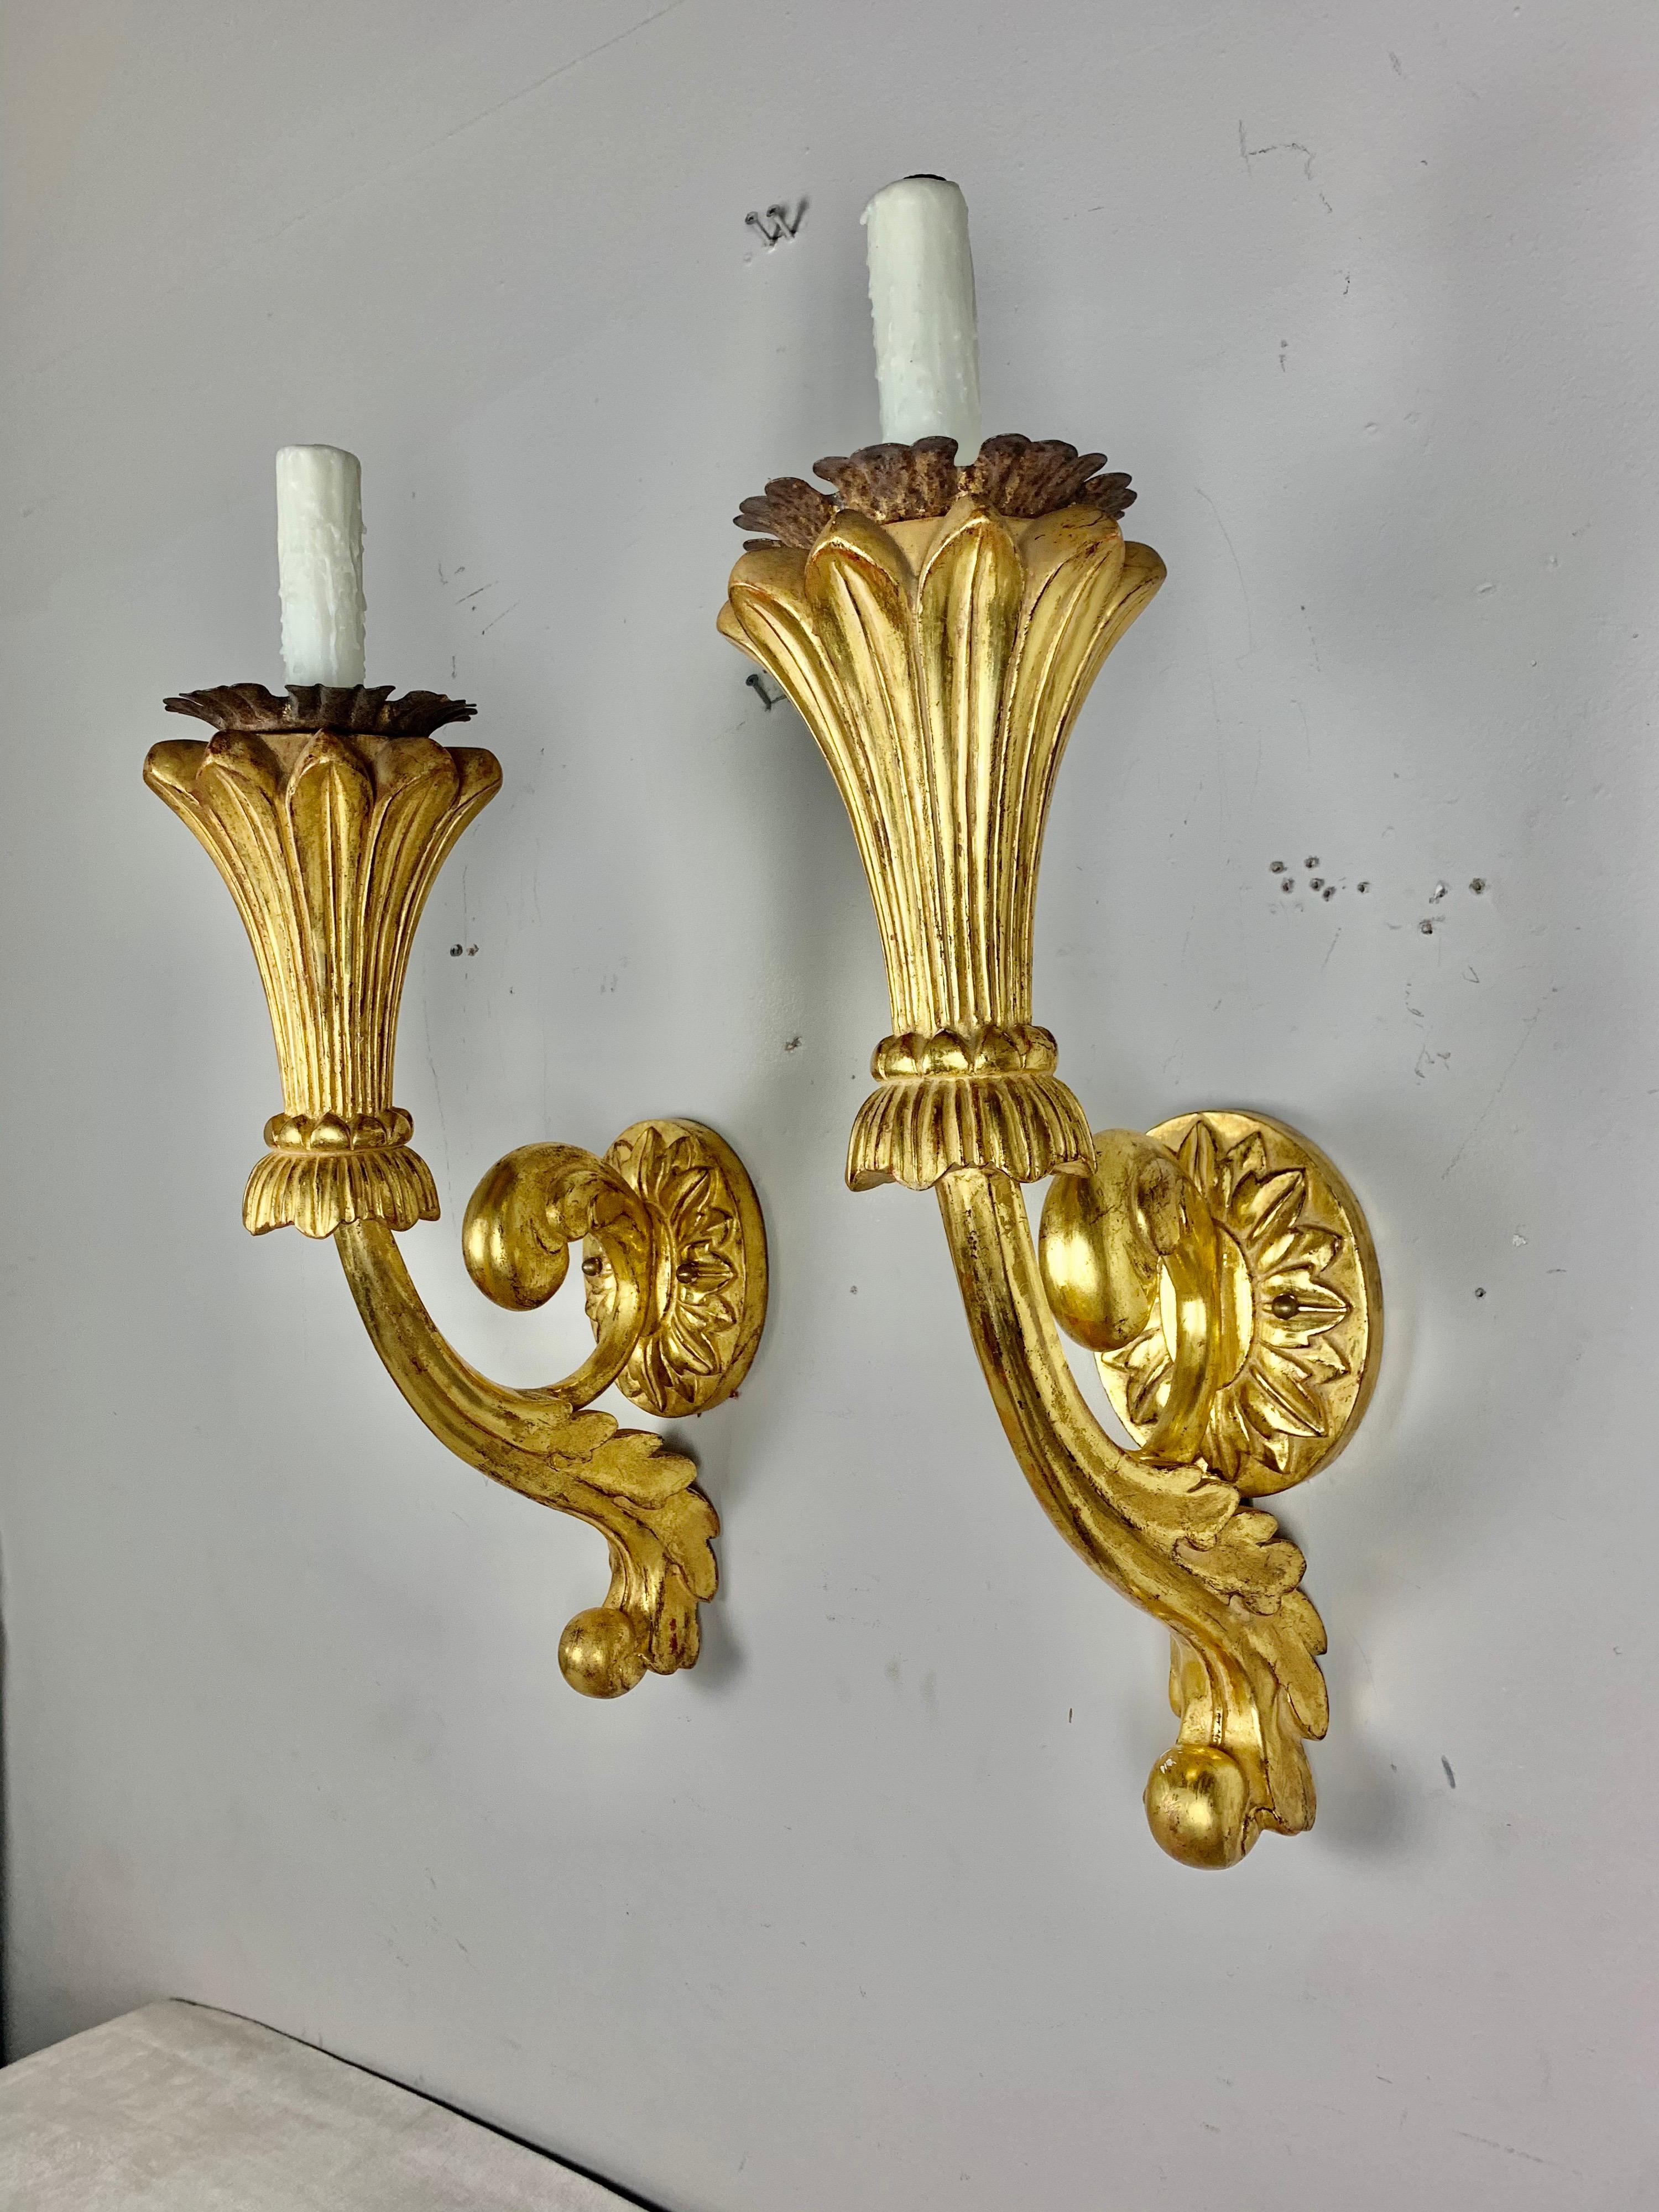 Pair of carved giltwood Italian style sconces with wrought iron bobeches. The sconces are newly rewired and ready to install.